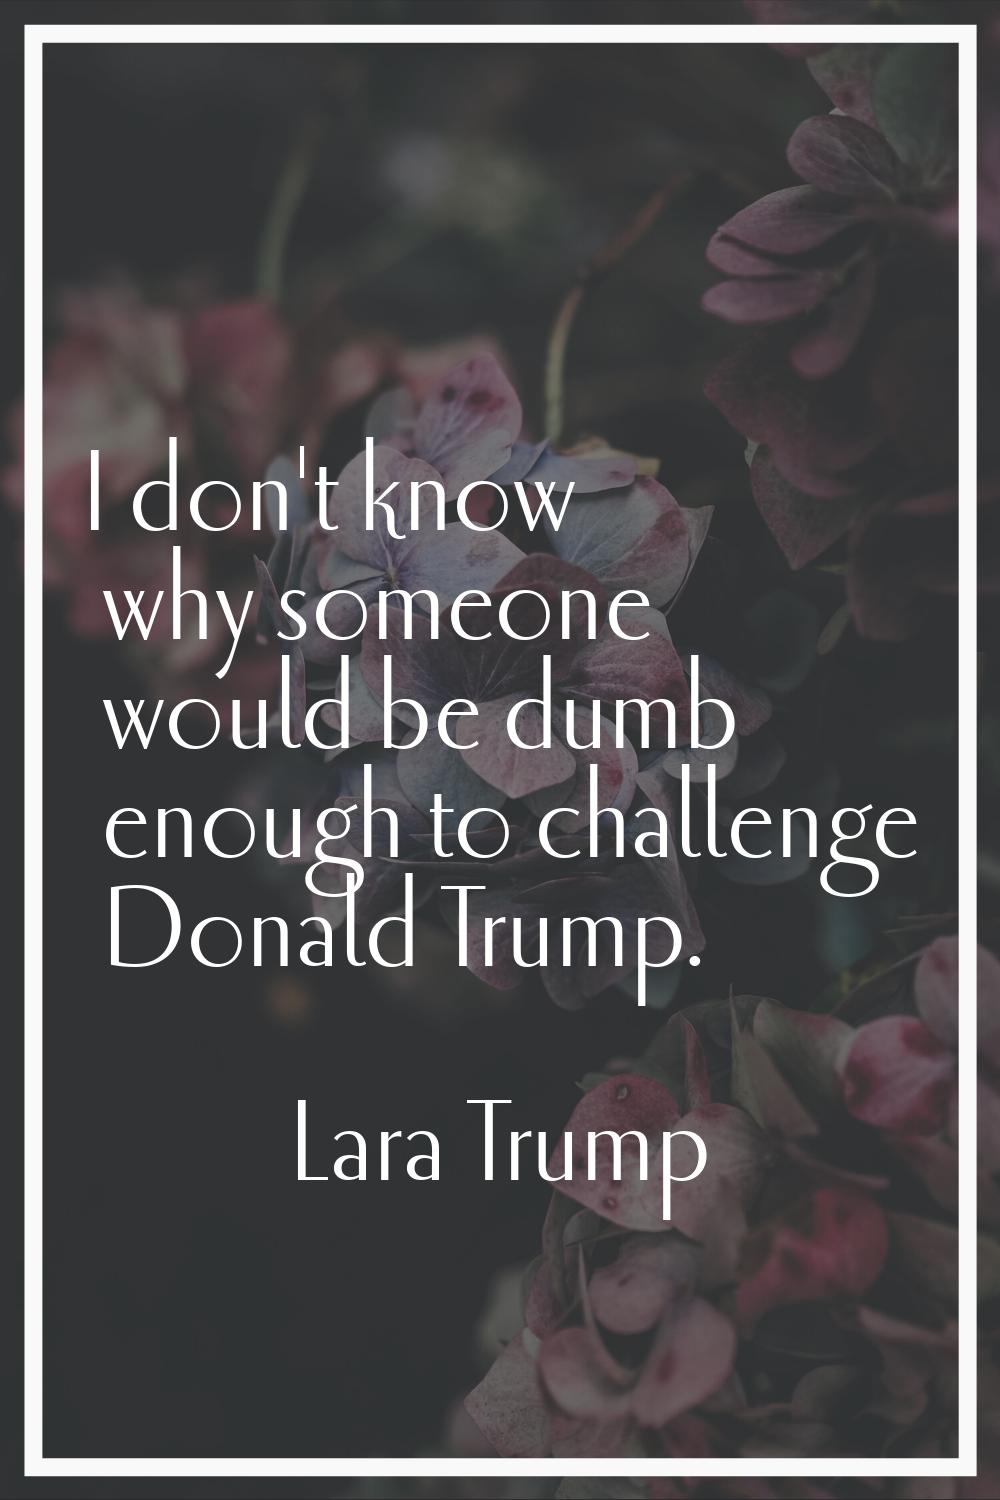 I don't know why someone would be dumb enough to challenge Donald Trump.